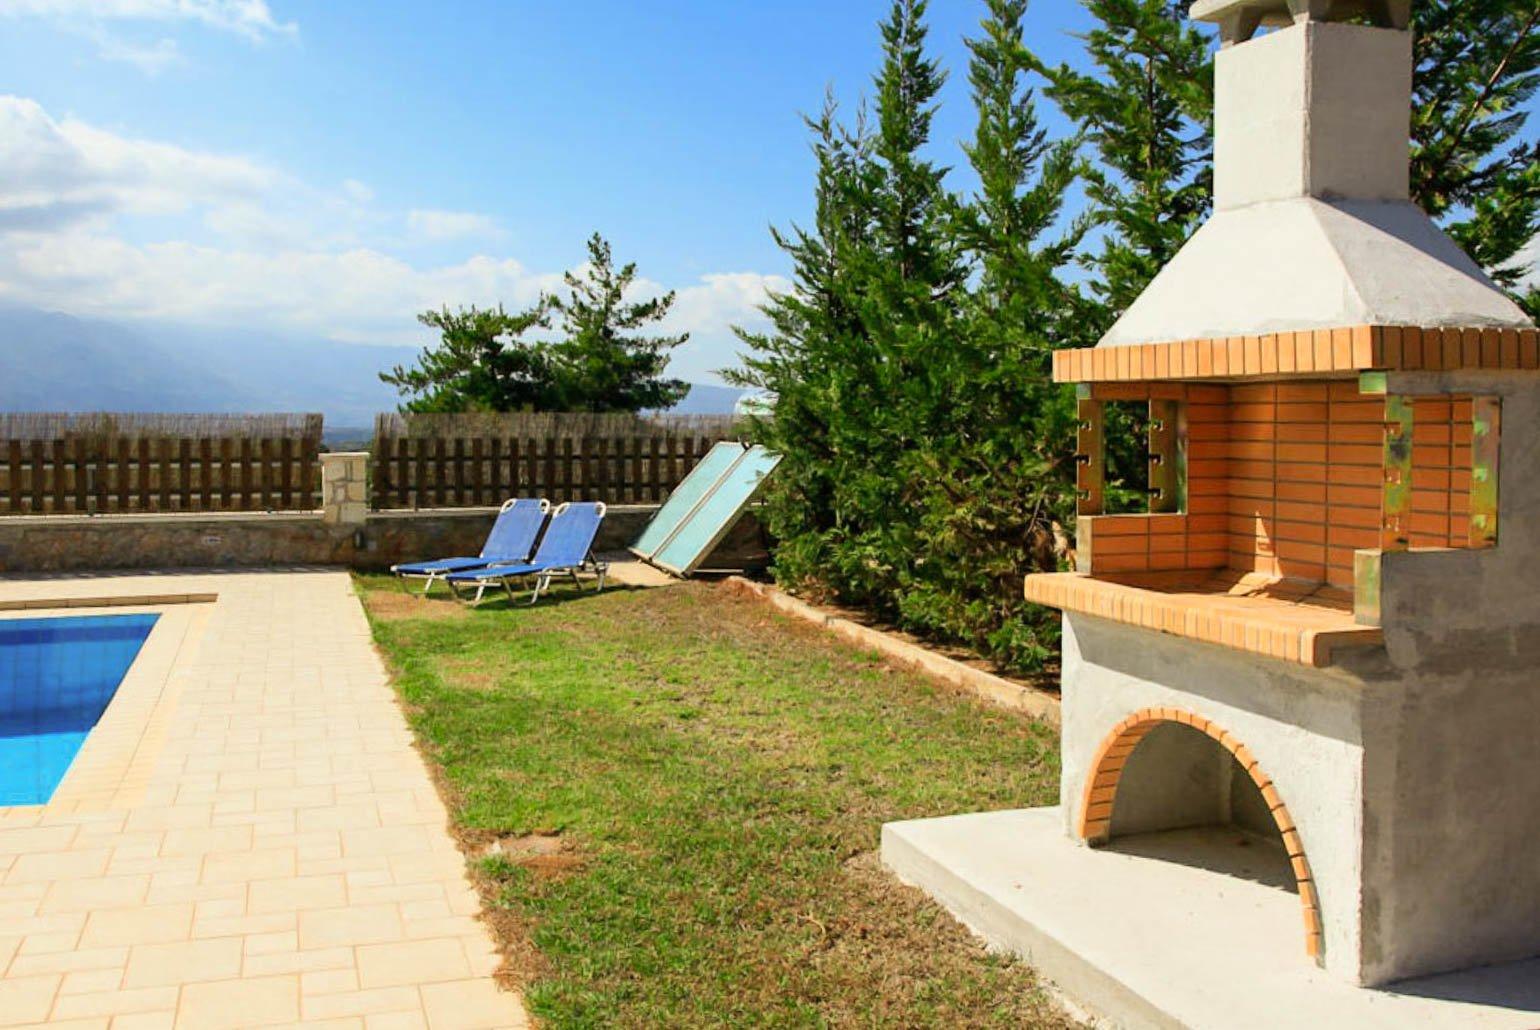 Terrace area with BBQ